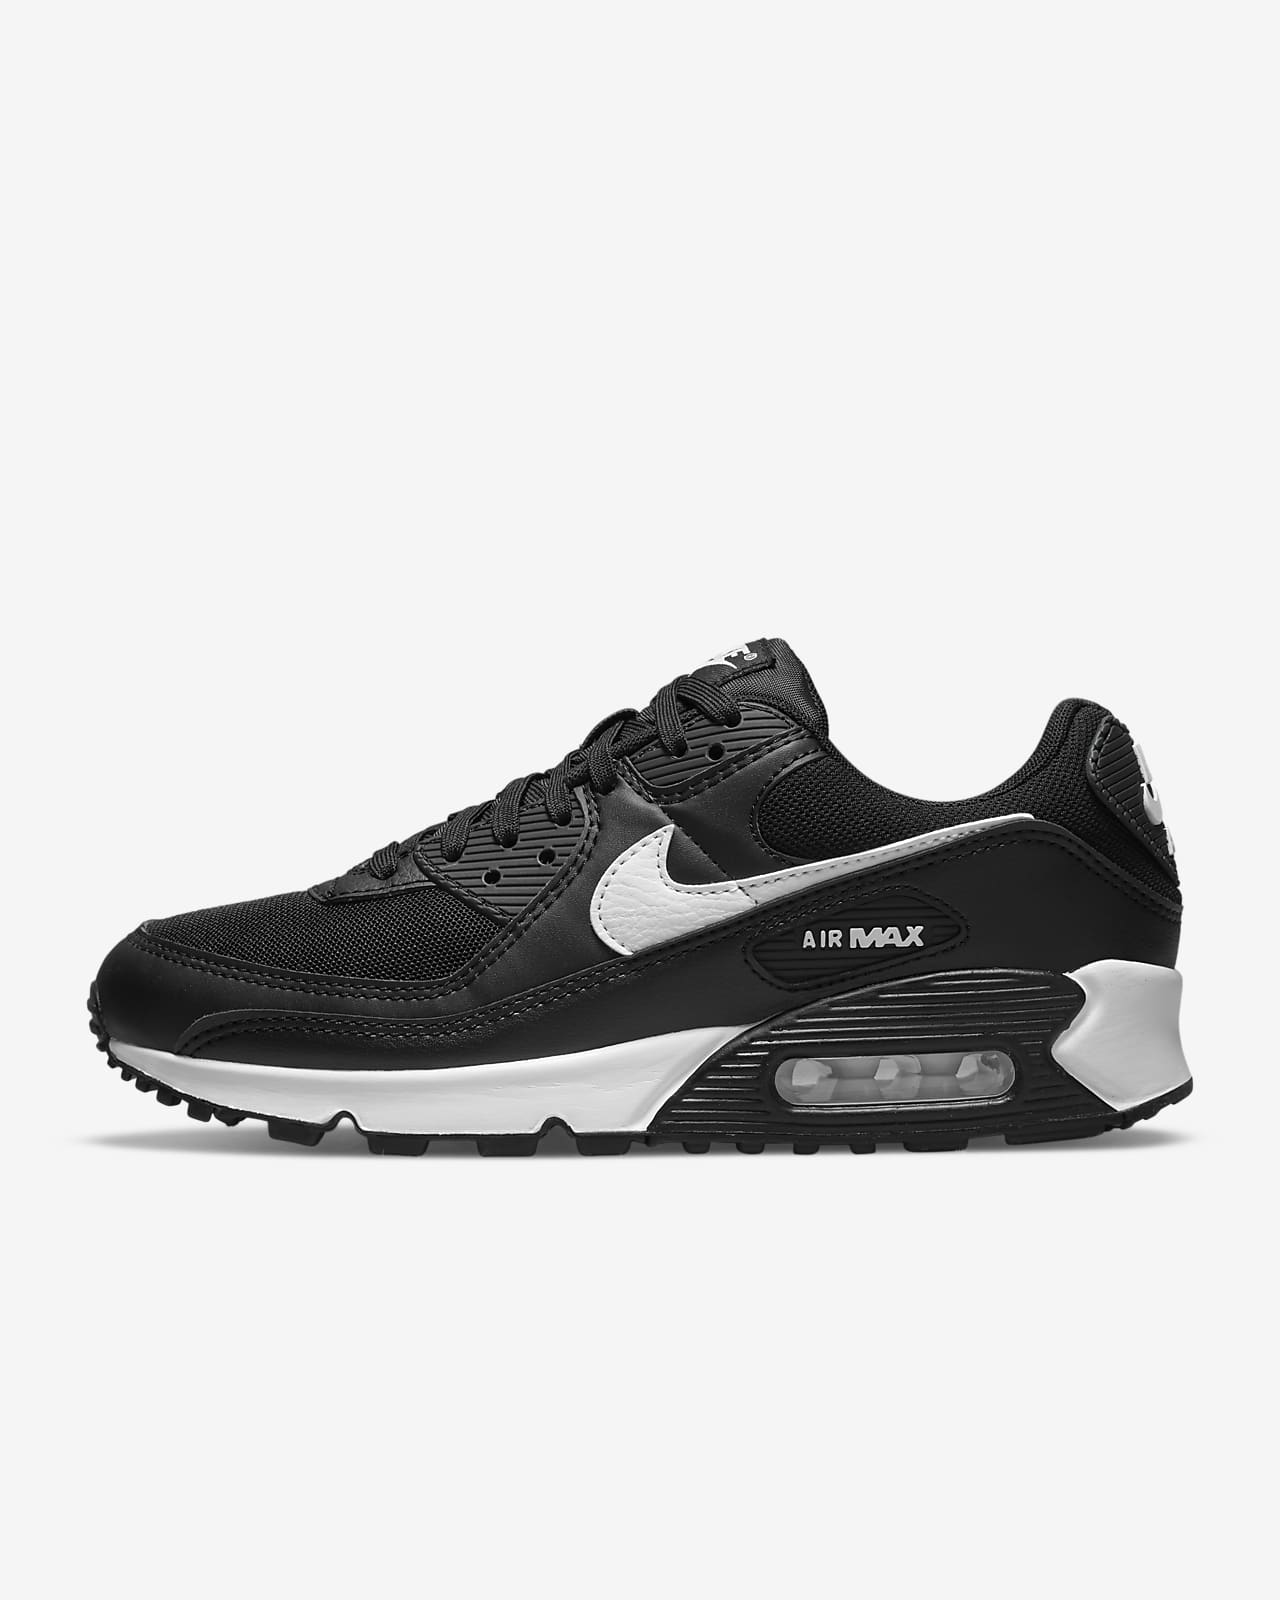 Nike Air Max 90 Womens Shoes Review